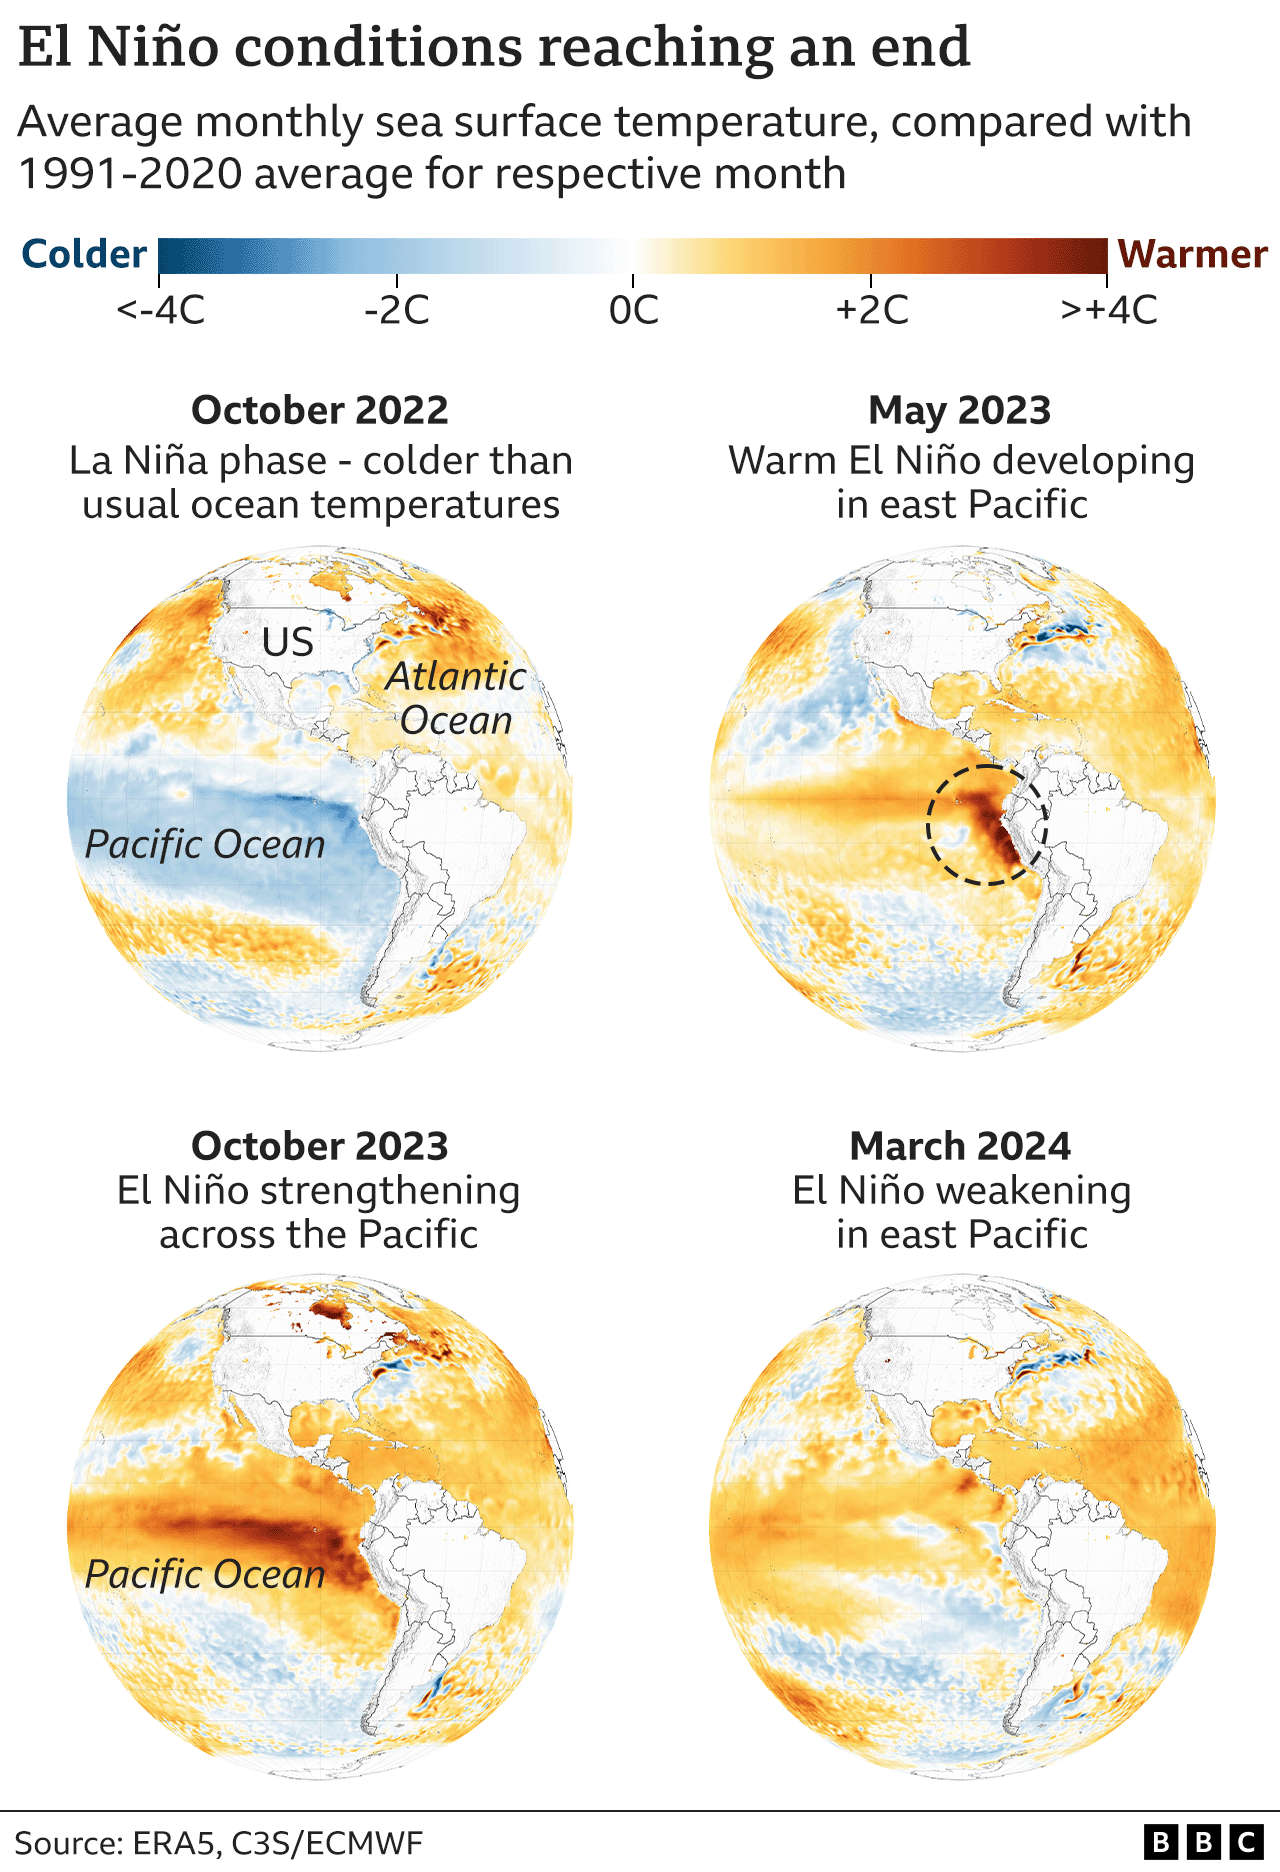 Four maps showing different stages of El Niño and La Niña. La Niña (October 2022) is marked by cool waters in the Pacific. El Niño conditions were emerging by May 2023 with warm waters in the East Pacific, and El Niño had strengthened by October 2023 as warm waters spread. In March 2024, waters had begun to cool as El Niño weakened. [April 2024]